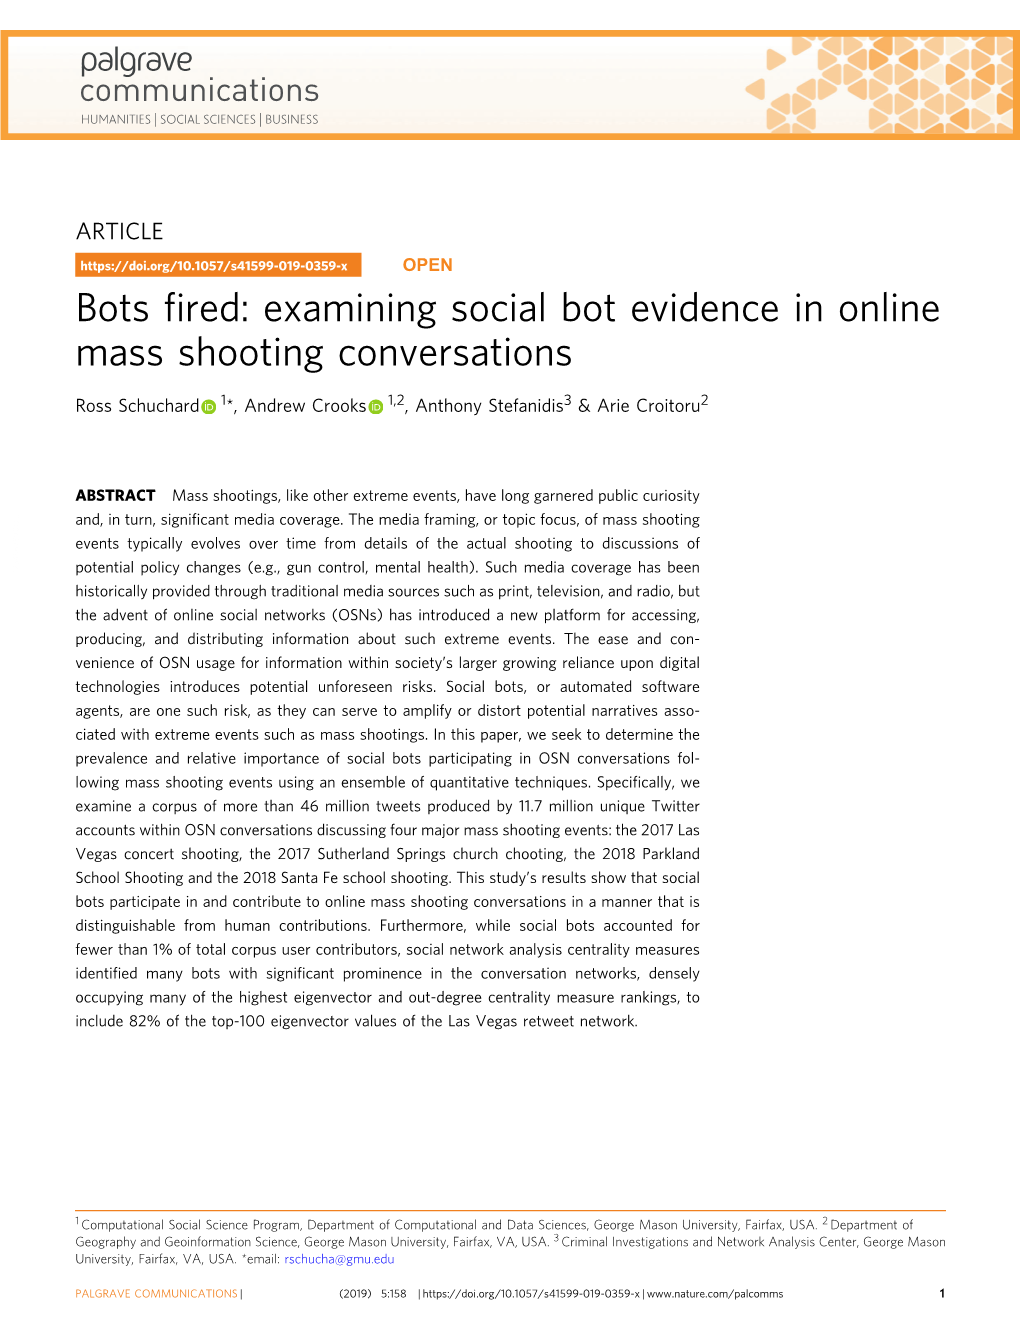 Bots Fired: Examining Social Bot Evidence in Online Mass Shooting Conversations